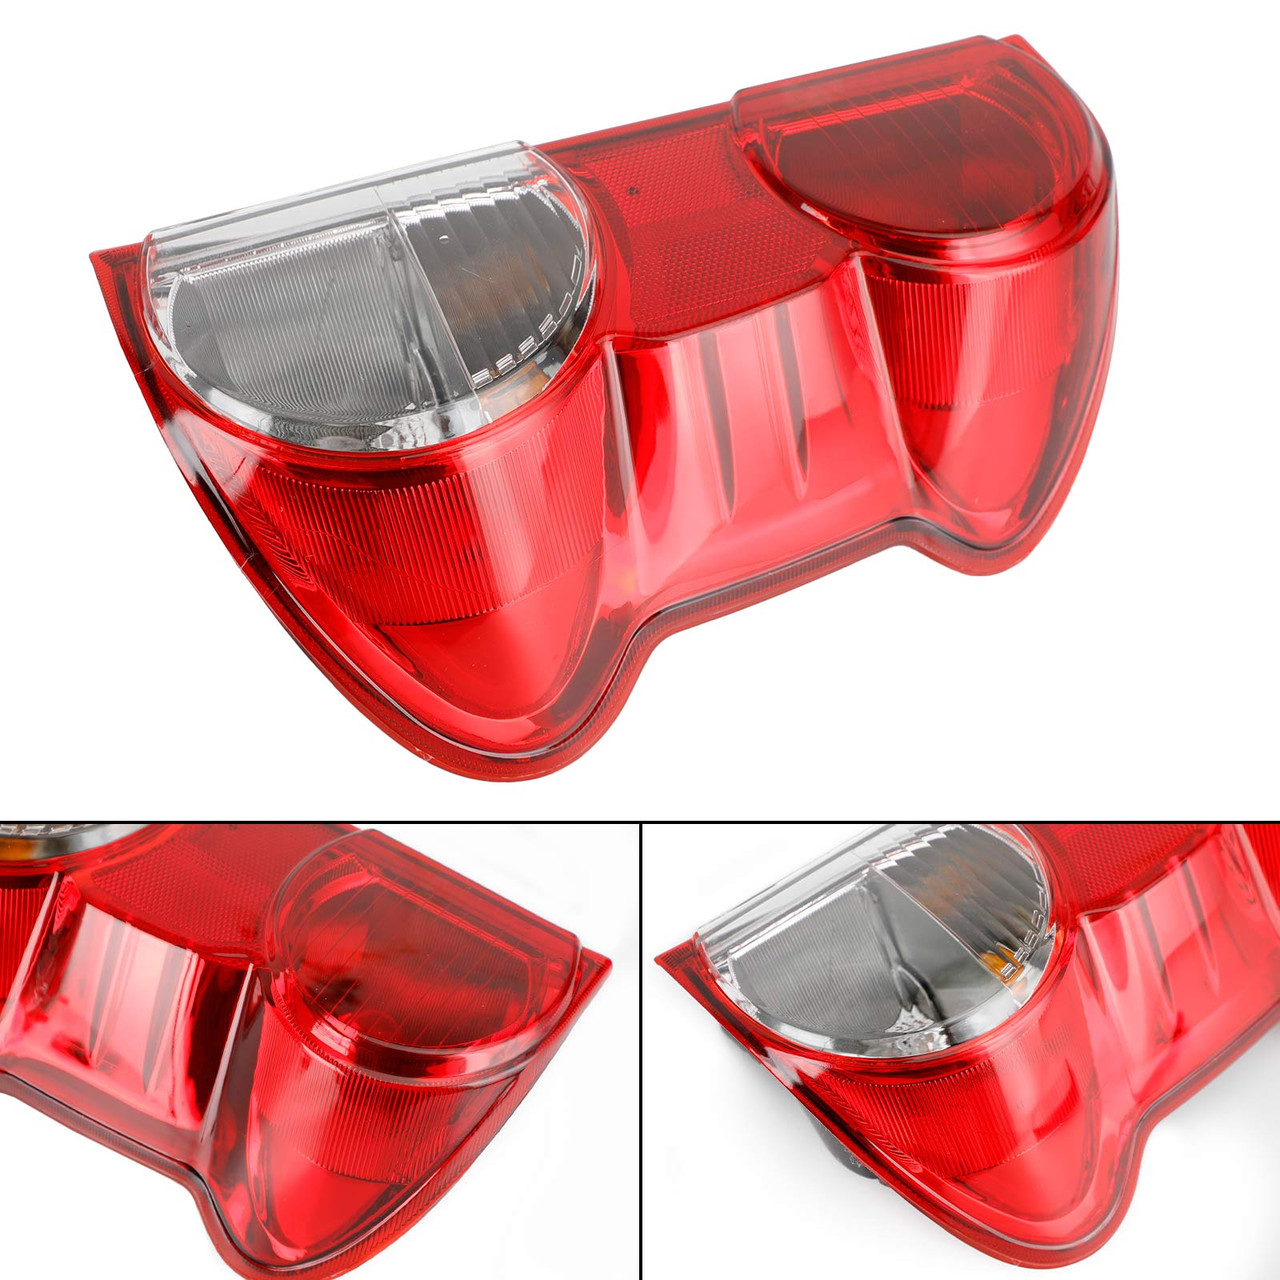 Right Tail Light Rear Lamp 12821817 Fit for Nissan NV200 Taxi 2014-2018